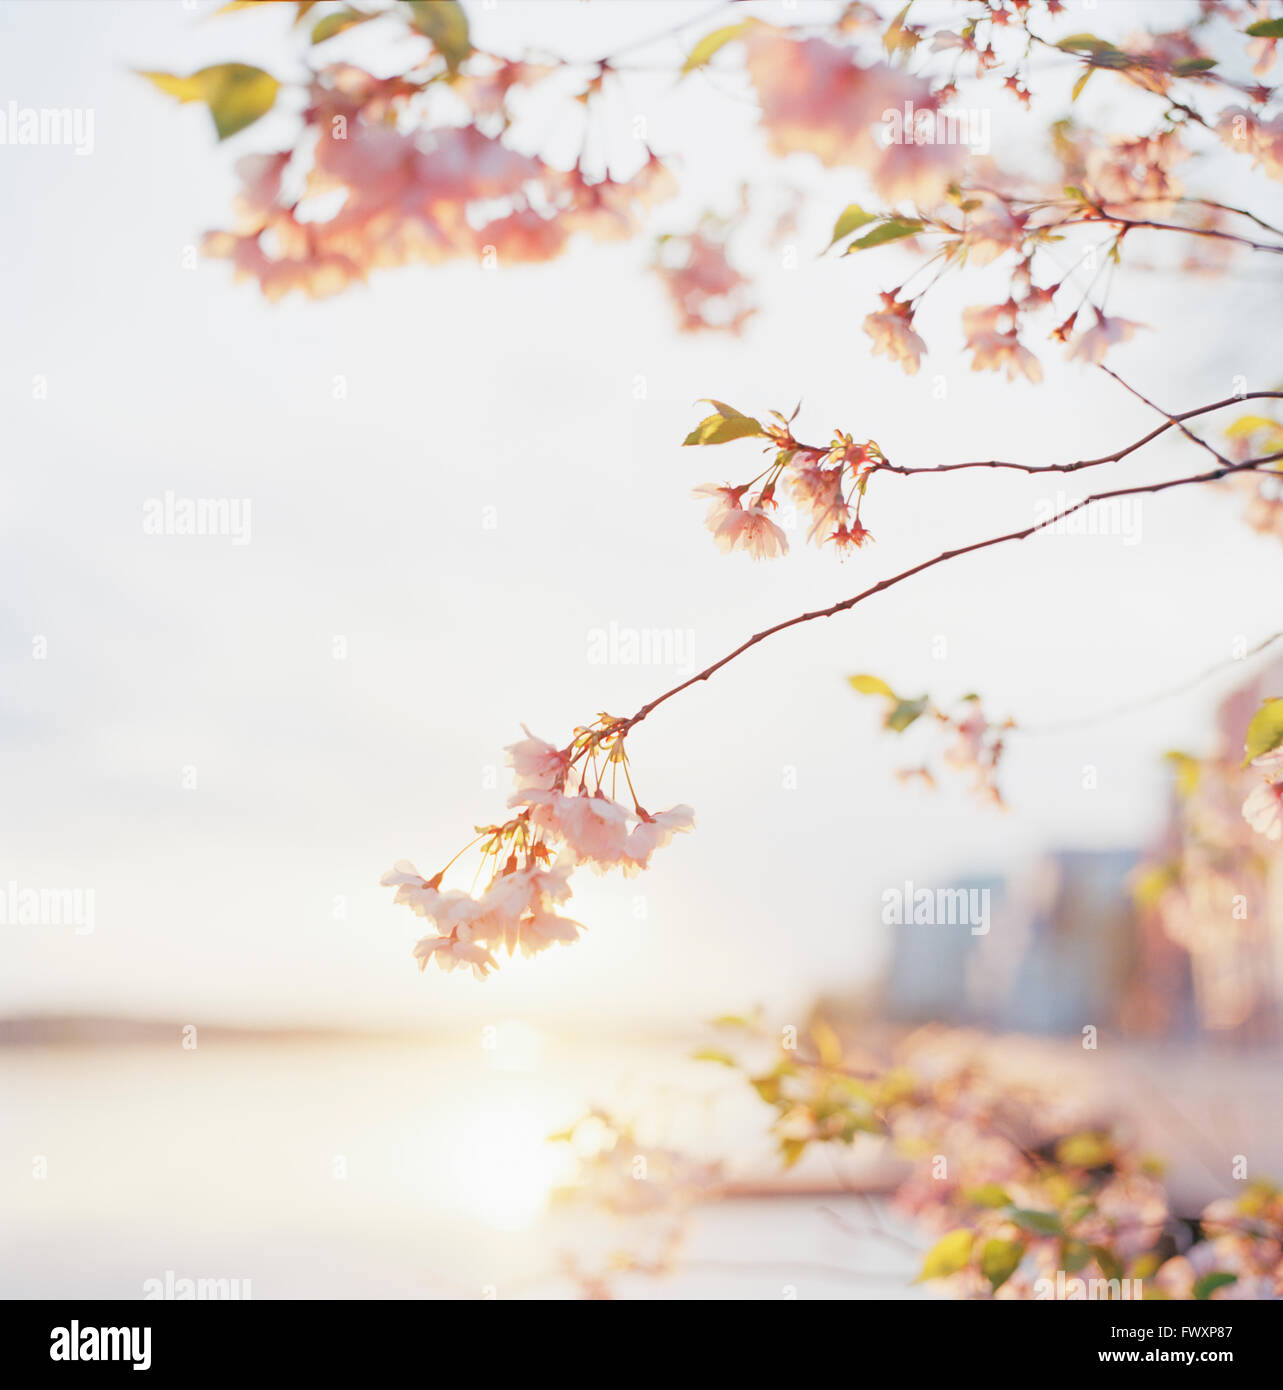 Sweden, Sodermanland, Nacka, Close-up of cherry blossom Stock Photo